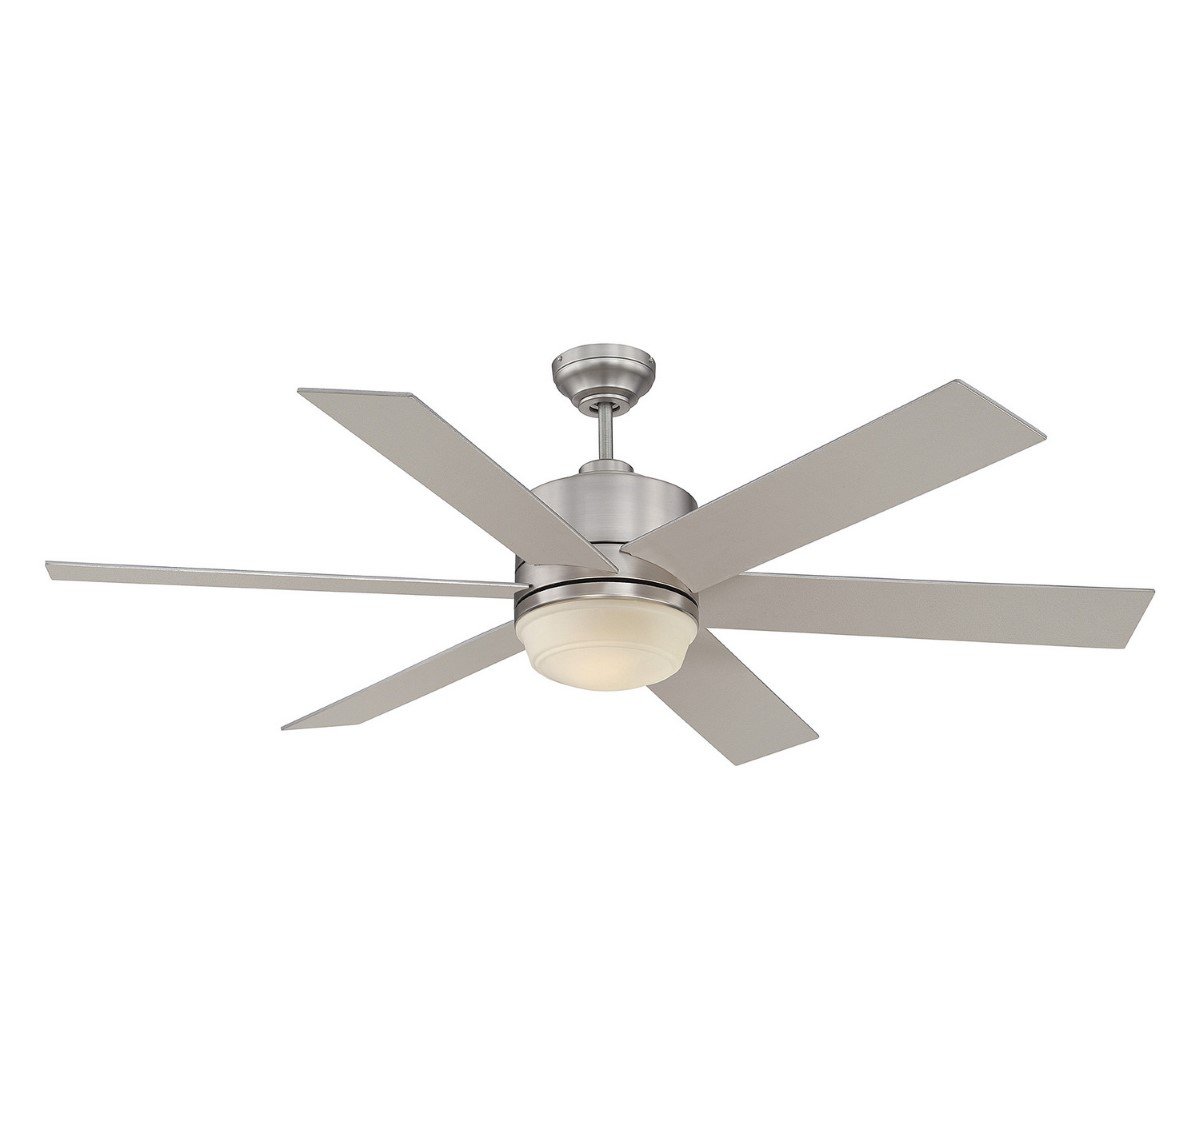 60-820-6SV-SN VELOCITY 60-In Damp Rated Ceiling Fan+Remote SATIN NICKEL MSRP: $594 CLEARANCE DISCOUNT! LOC: Rug 4